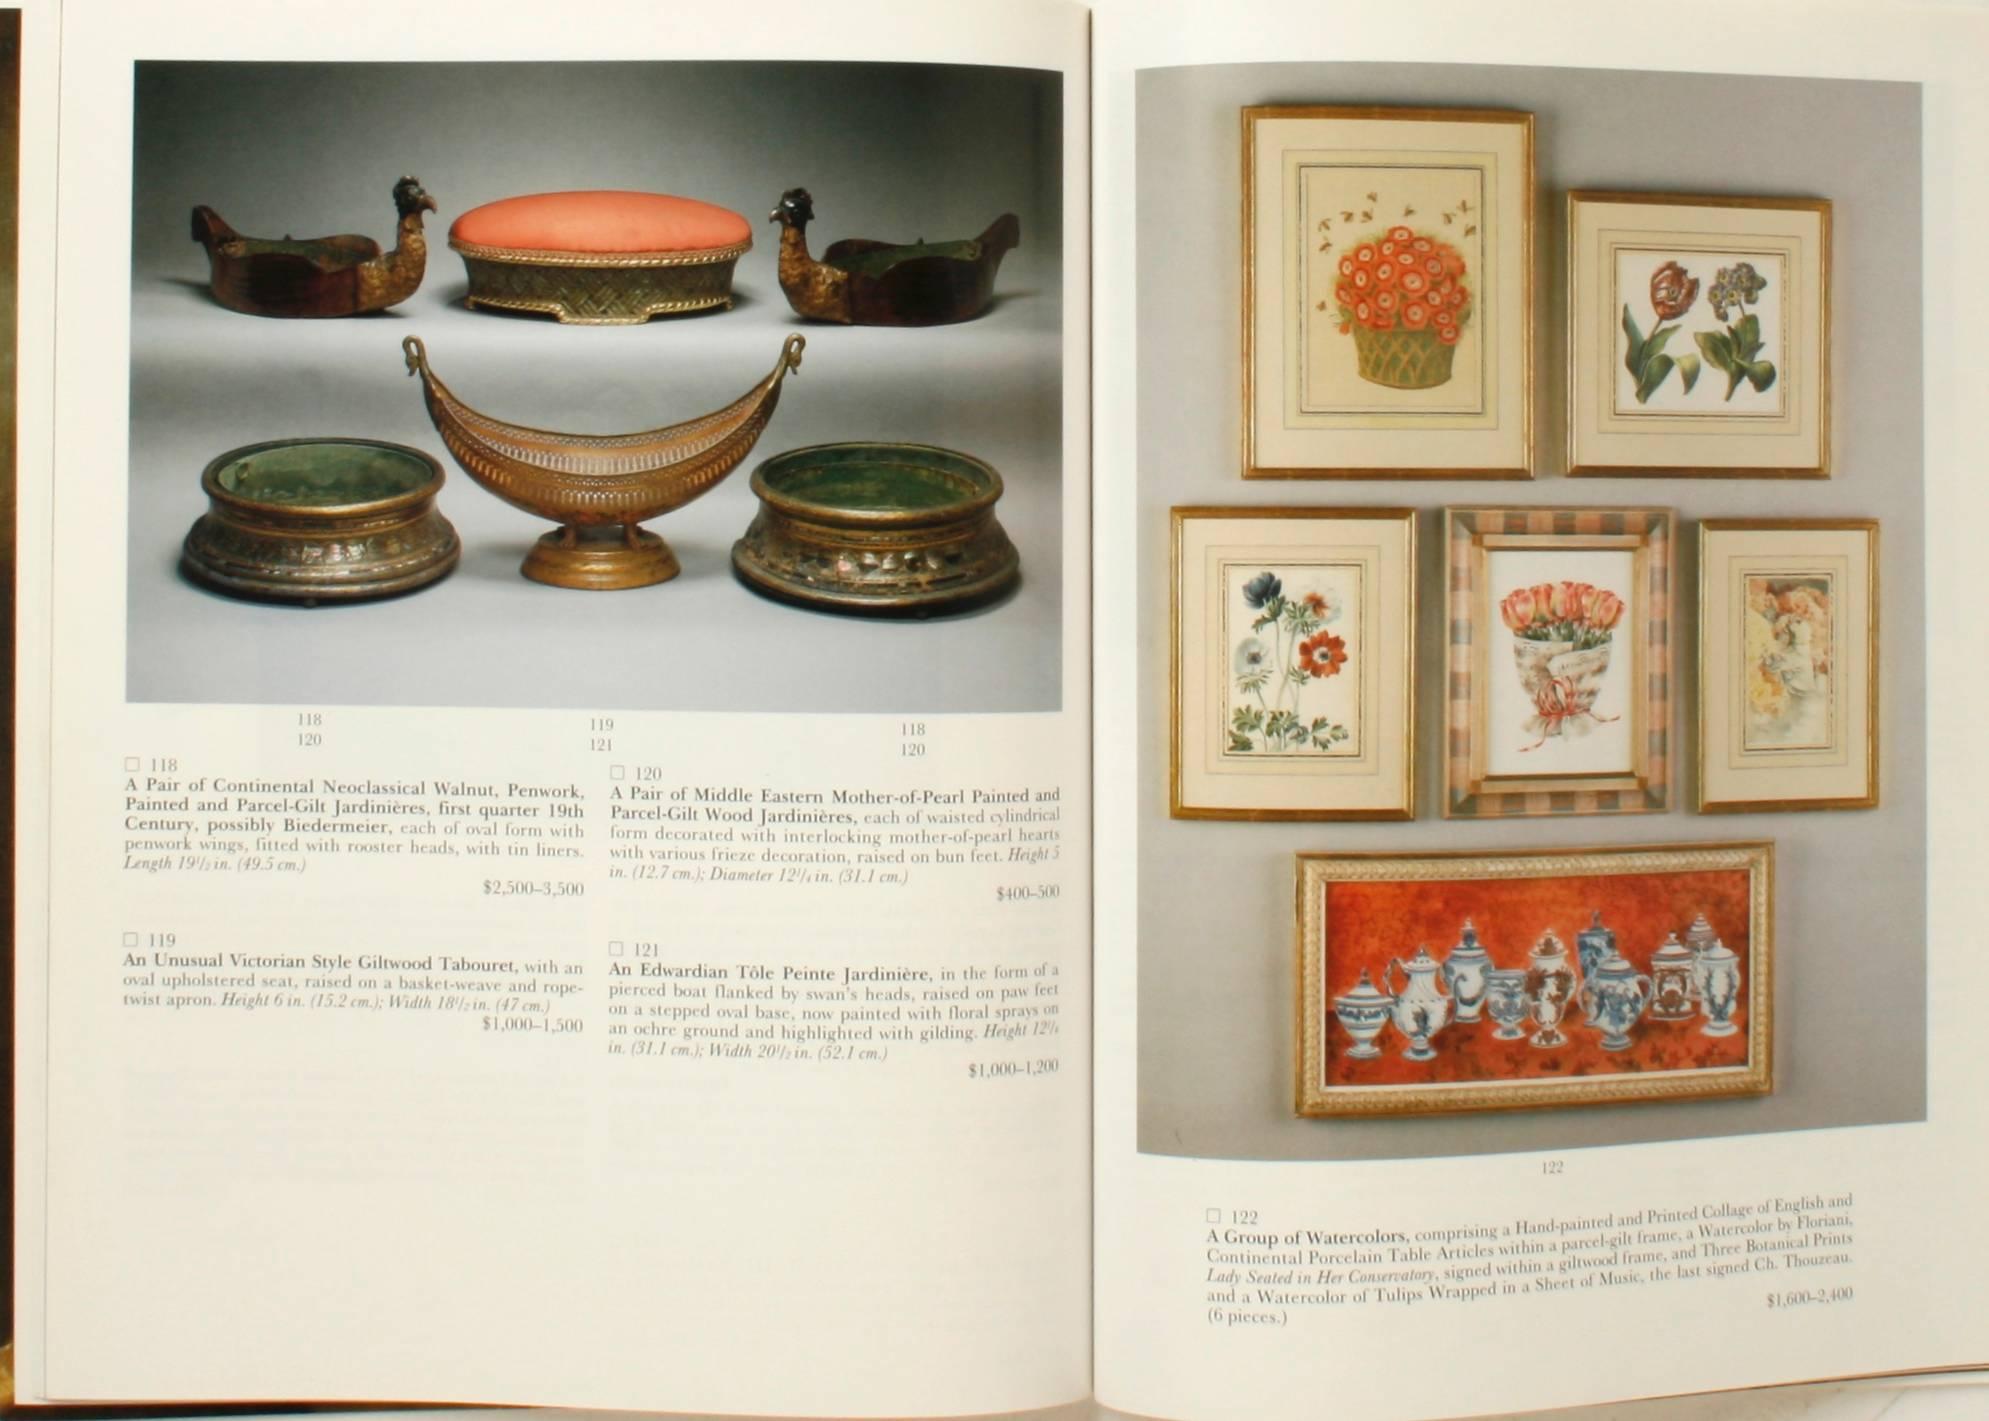 Sotheby's Property from the Collection of the Late Sister Parish, 9/29/95 4